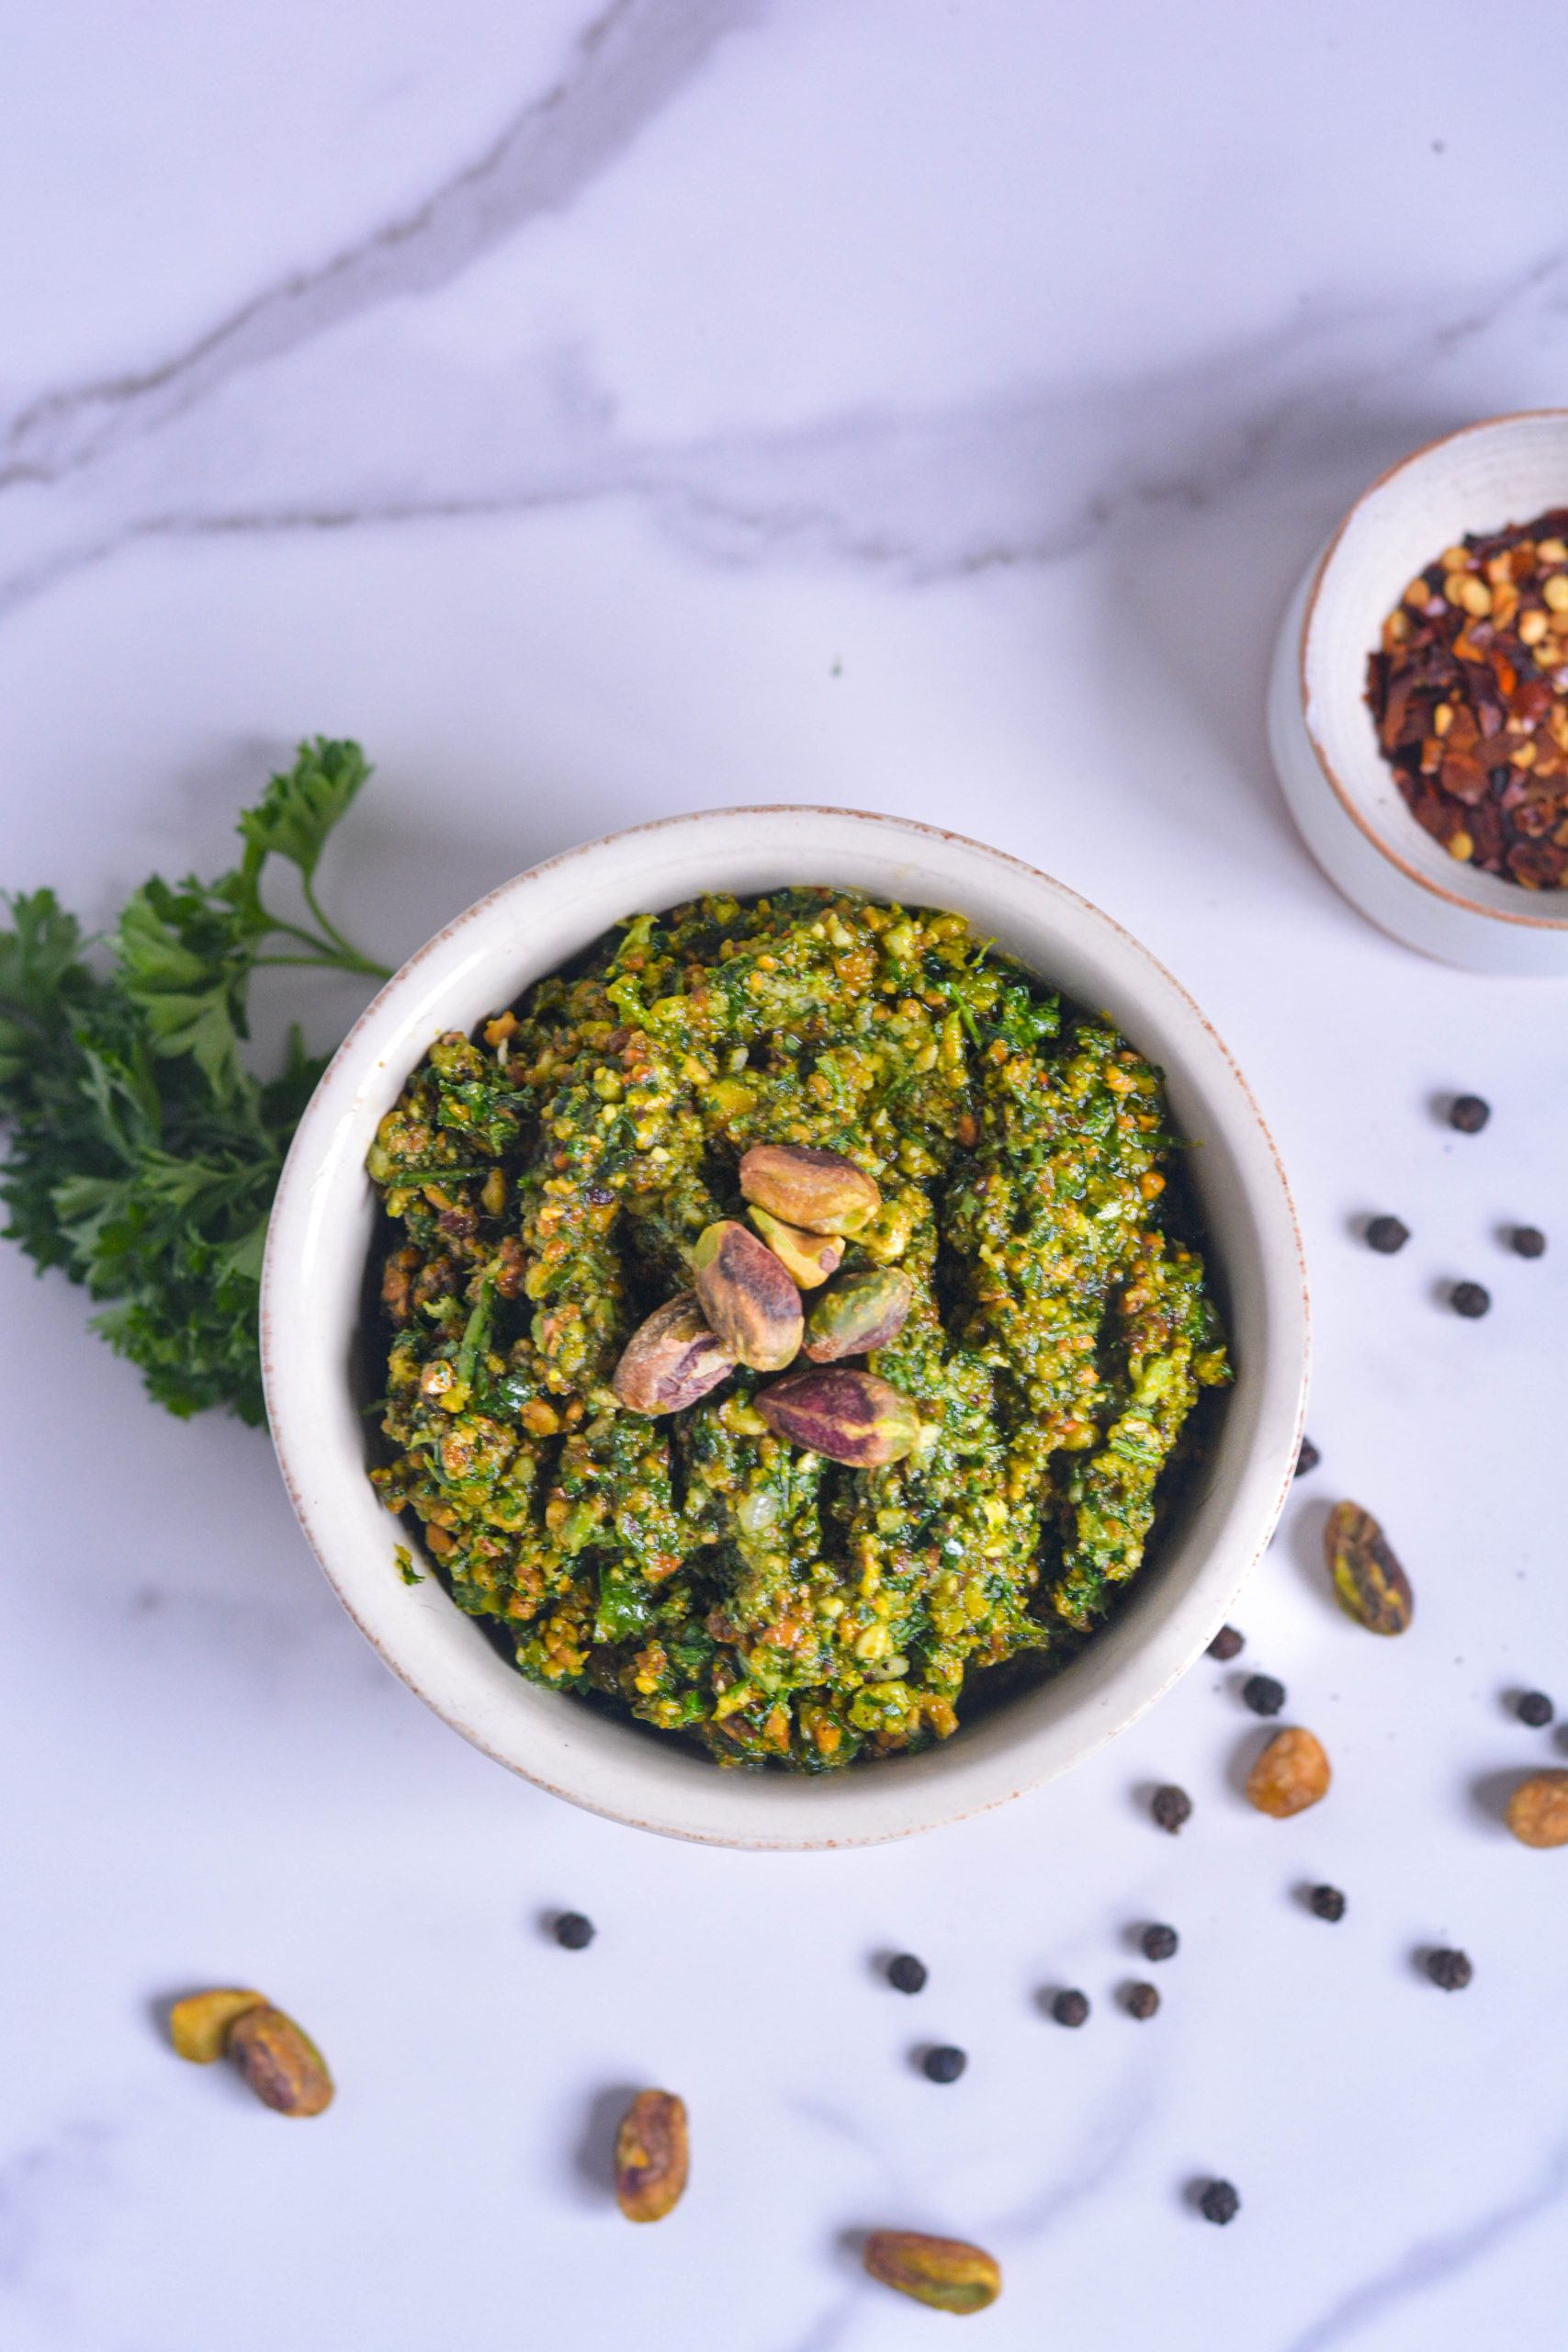 How to make Pistachio Gremolata: A Burst of Flavor and Texture